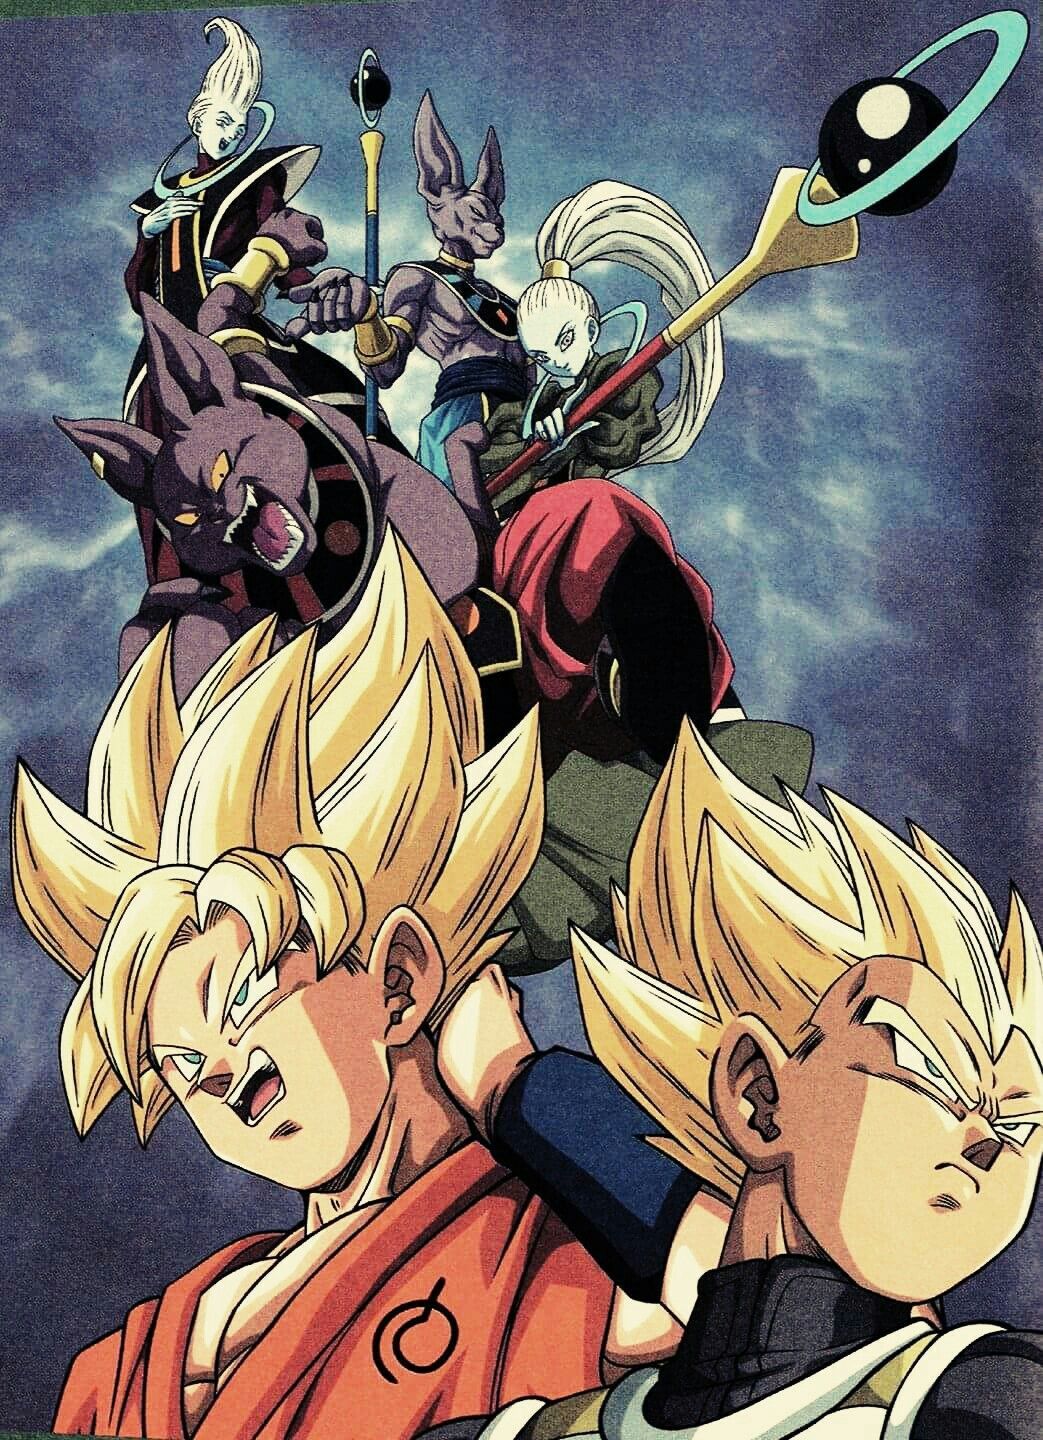 Goku and Vegeta with Whis, Vados, Lord Beerus, and Lord Champa